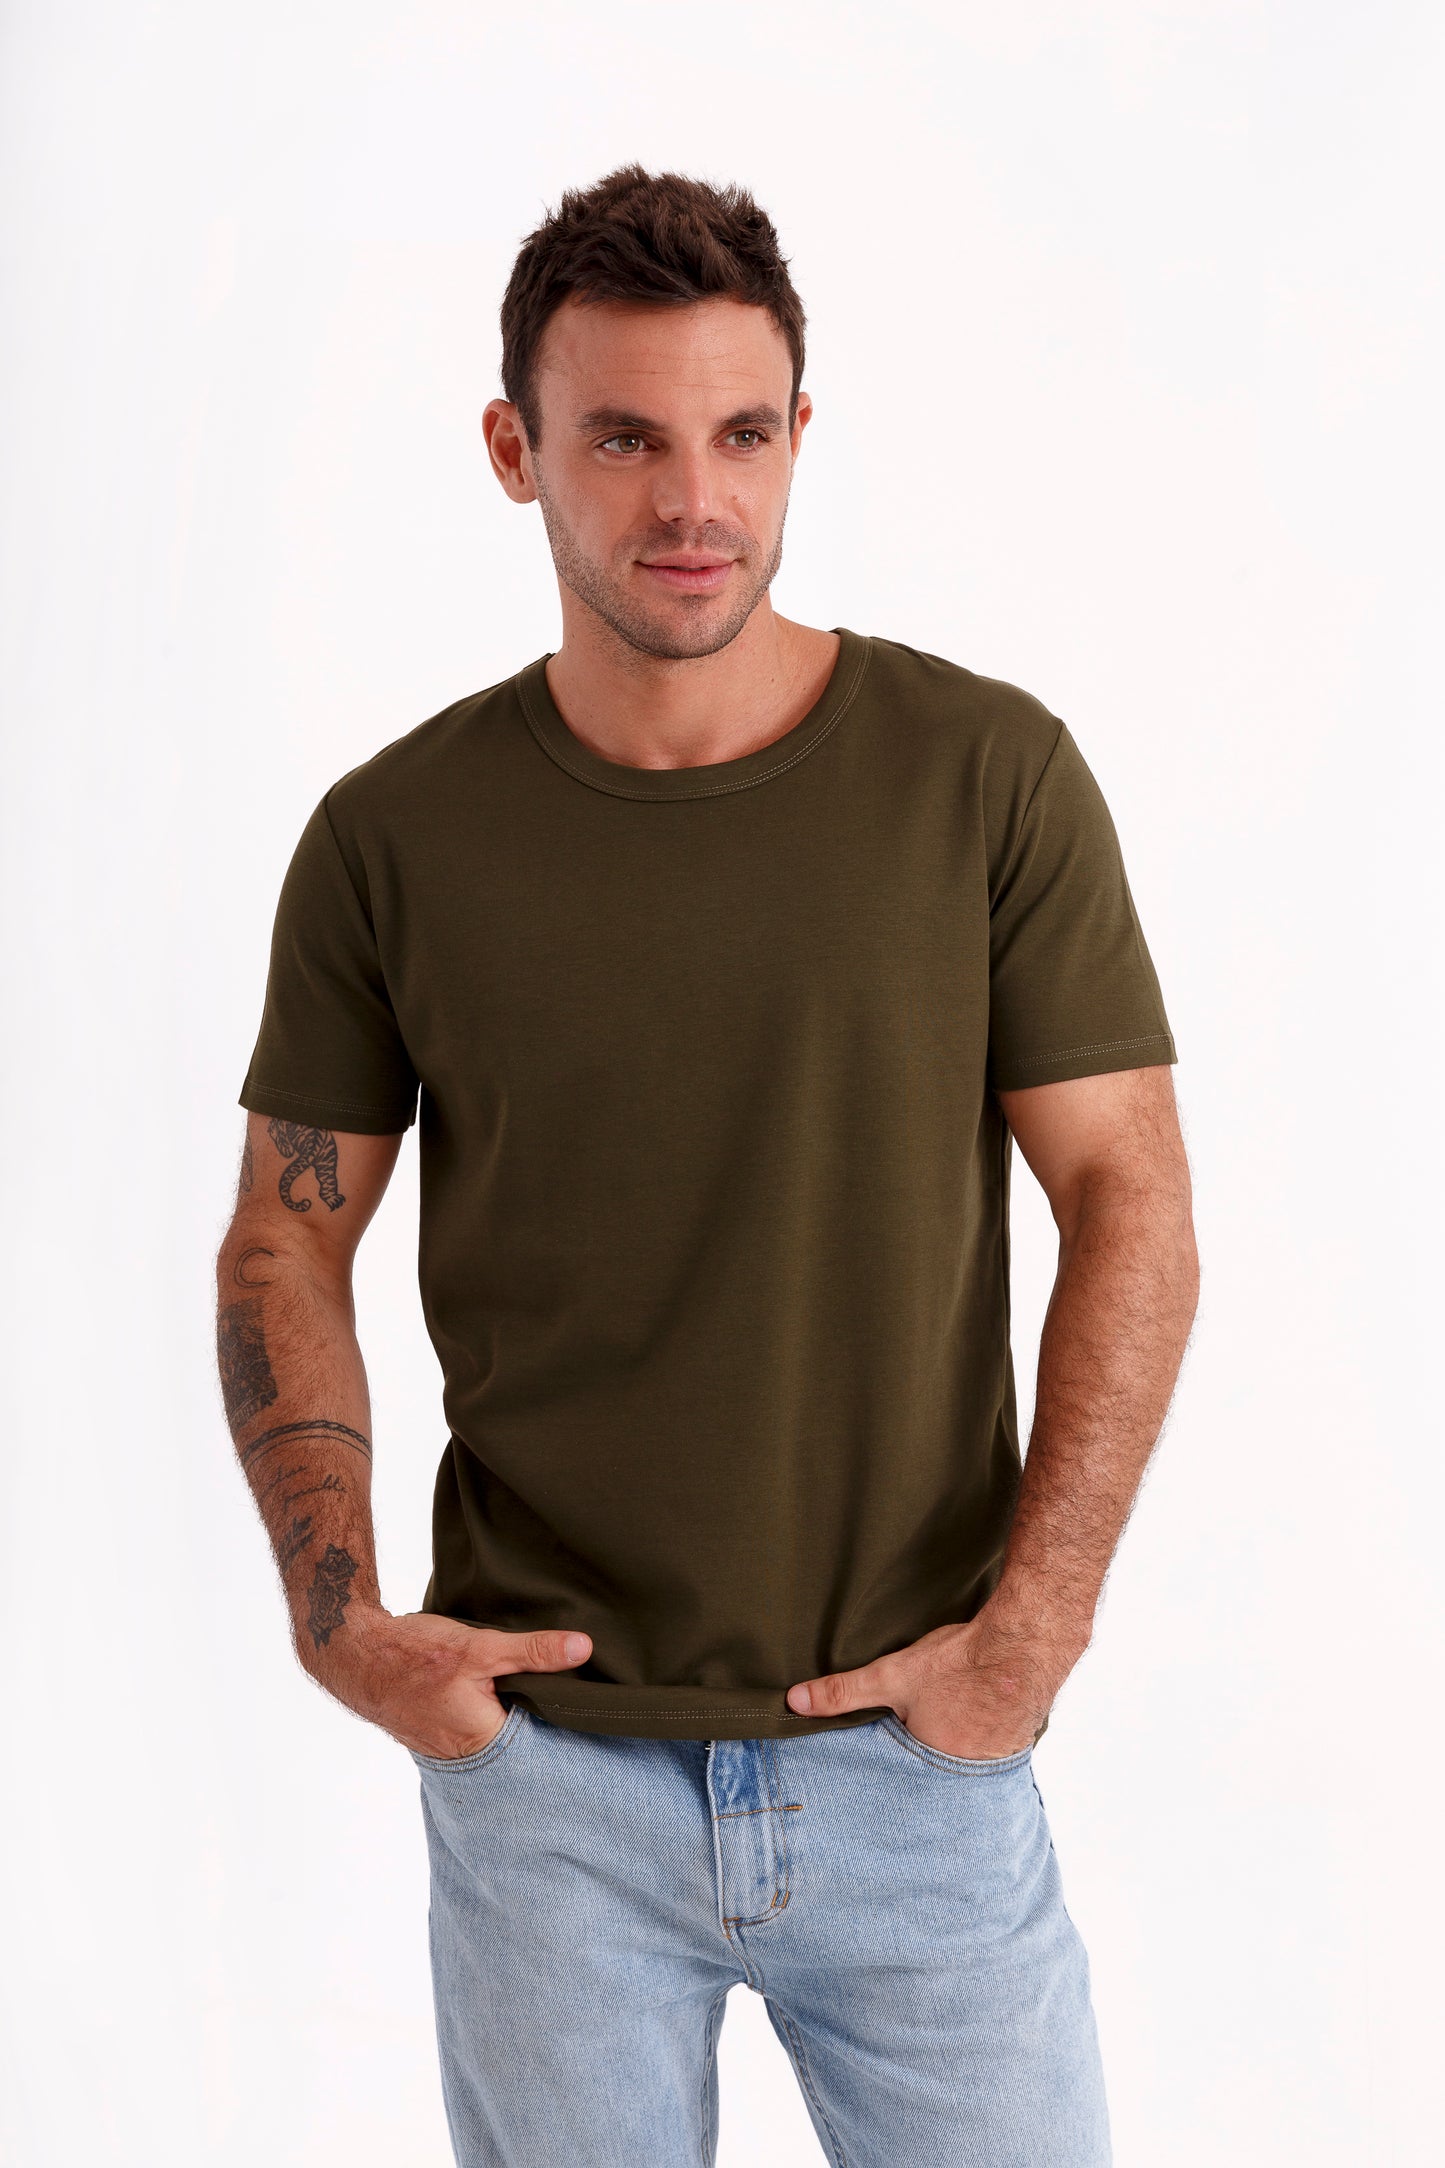 Men's "This t-shirts is green because it's ecofriendly"